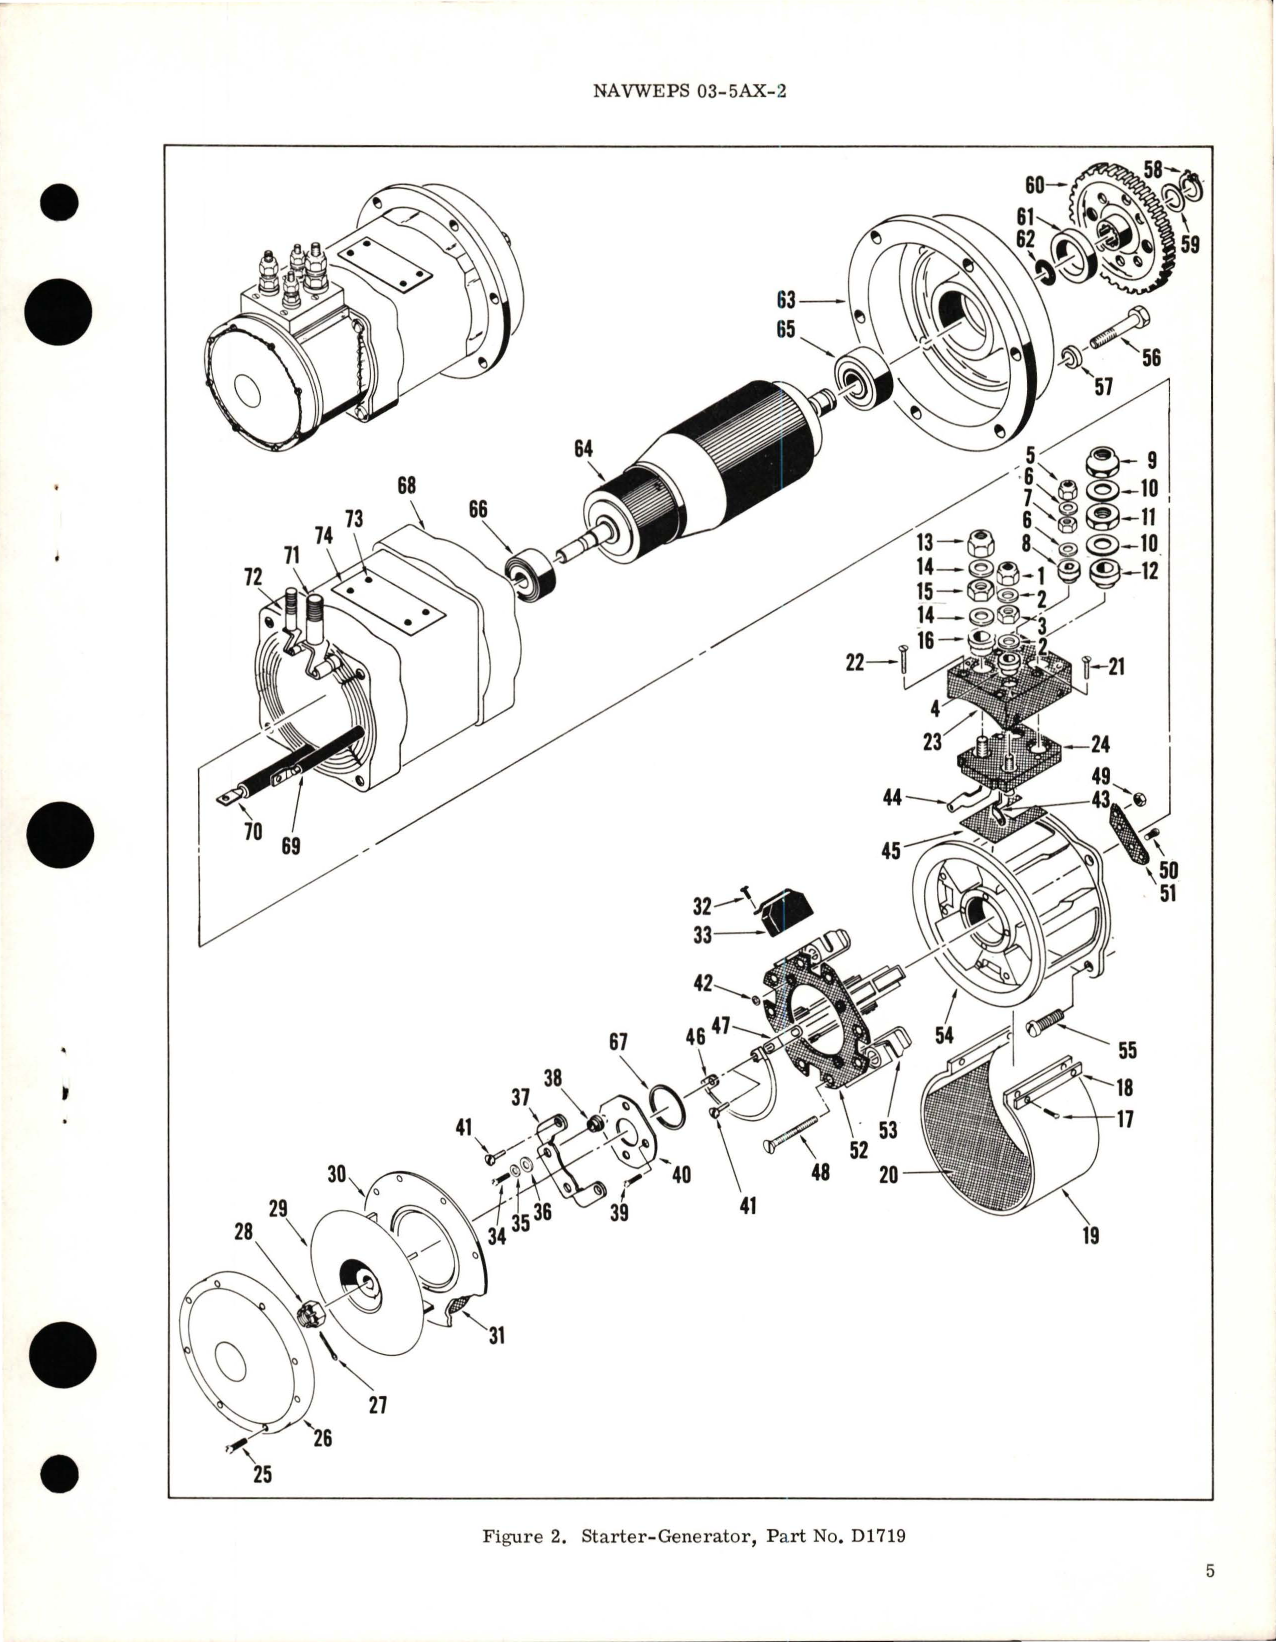 Sample page 5 from AirCorps Library document: Overhaul Instructions with Parts Breakdown for Starter Generator - Part 10-40115-1